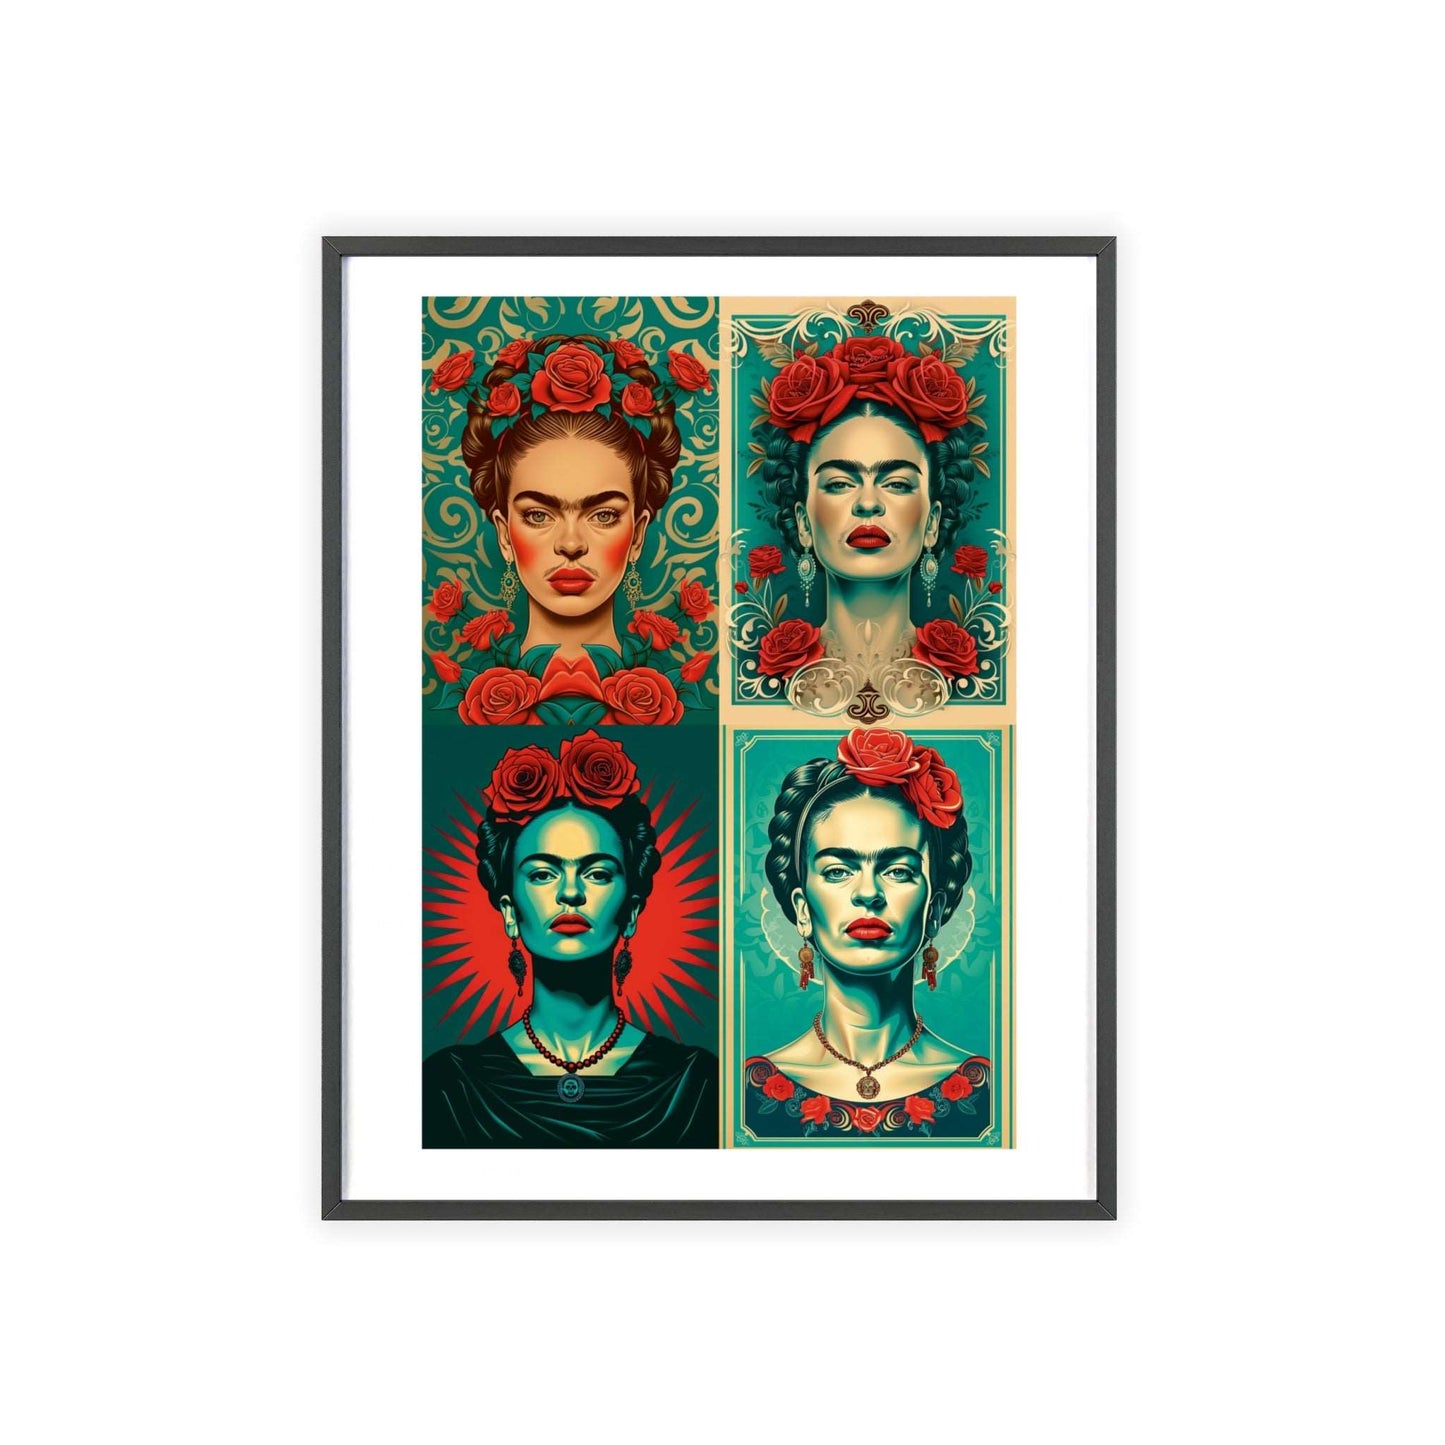 Framed poster featuring four separate Art Deco-inspired vector illustrations of Frida Kahlo. Each illustration uses a turquoise and red color palette and depicts Frida adorned with roses. The designs are detailed and flat, reminiscent of Dan Mumford's style.